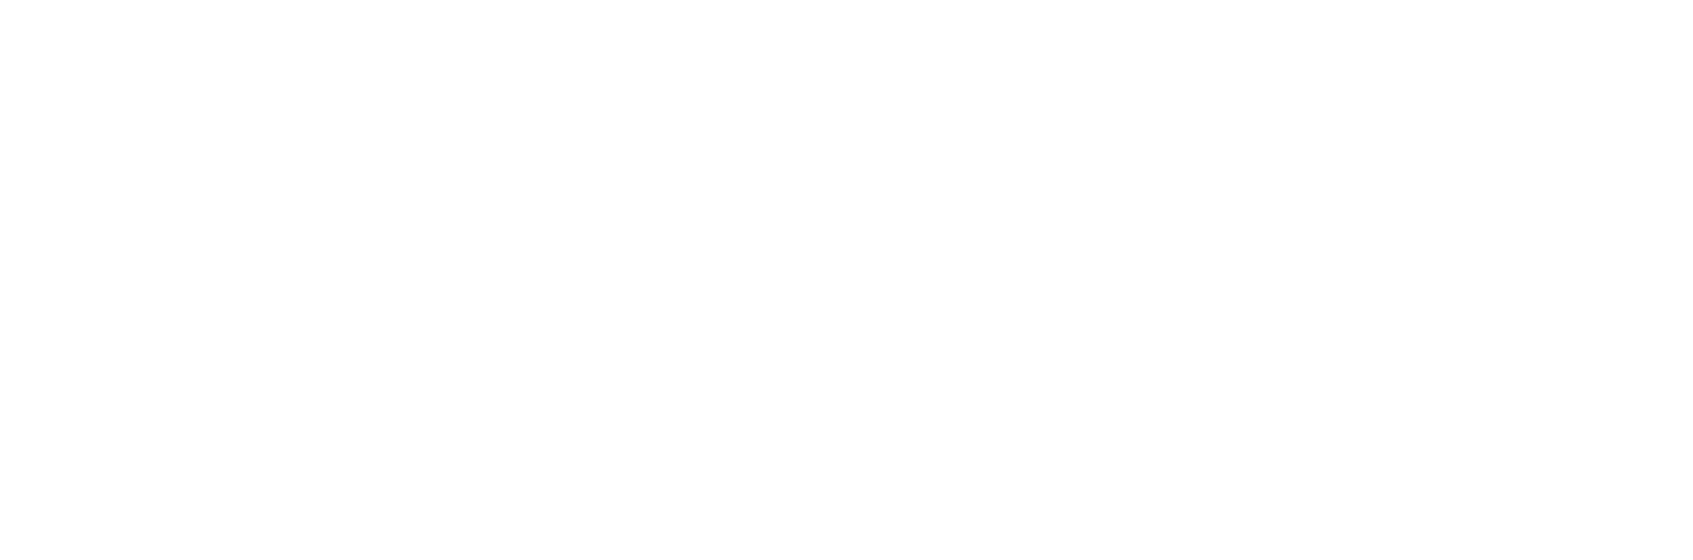 Another Code: Recollection